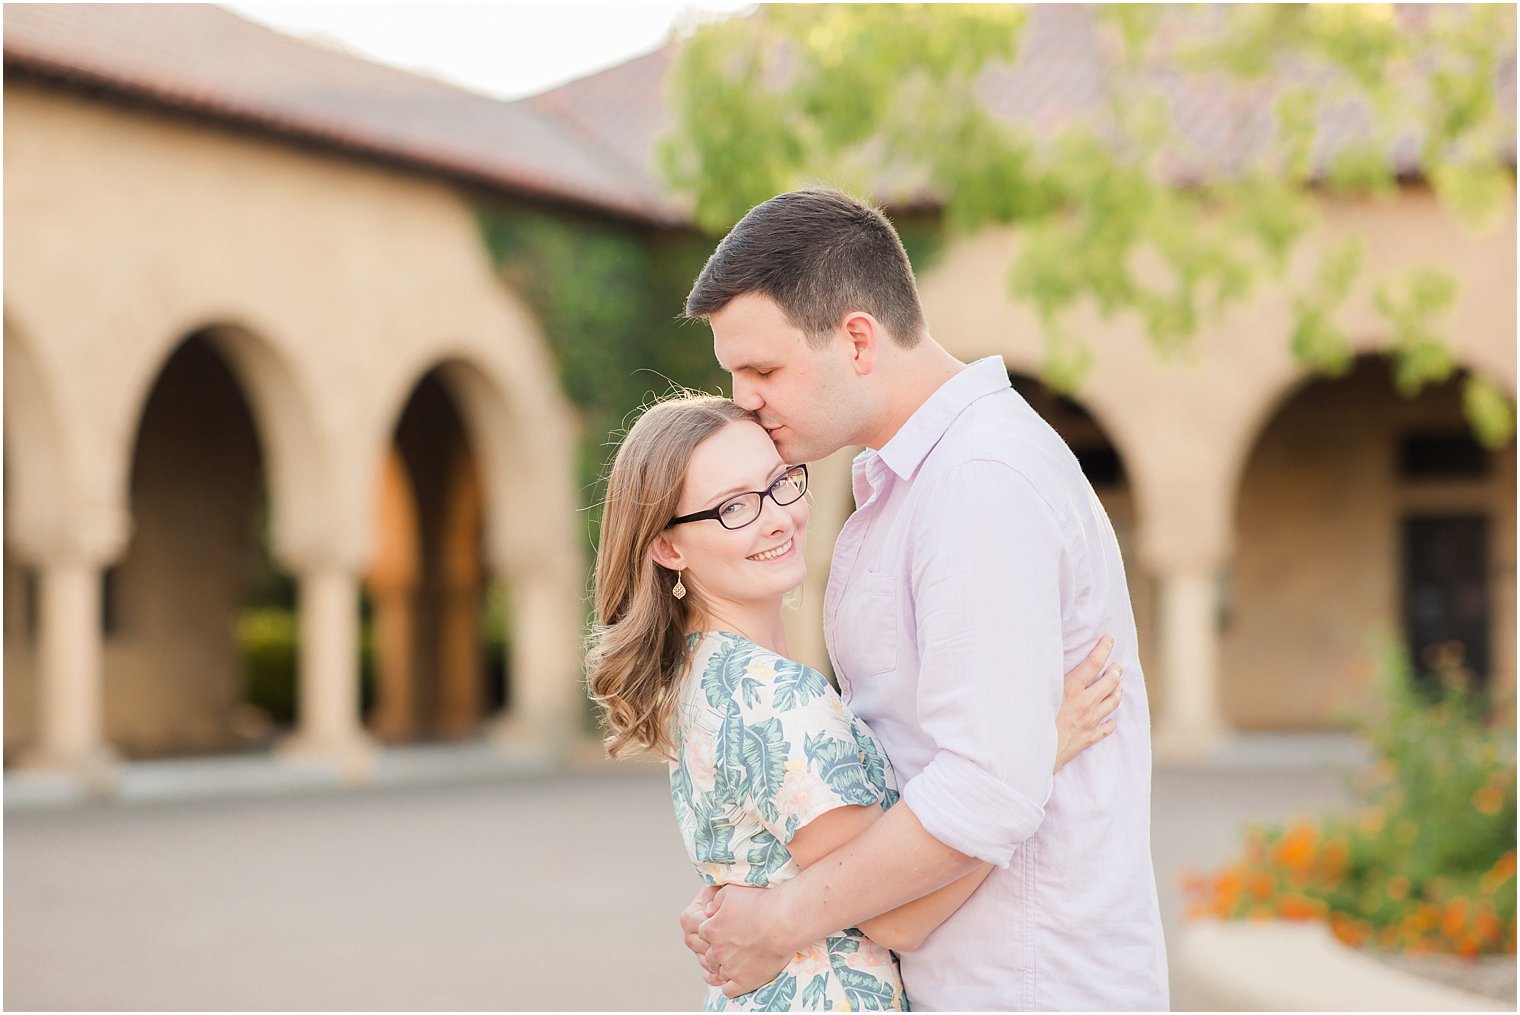 Engagement photos in courtyard at Stanford University